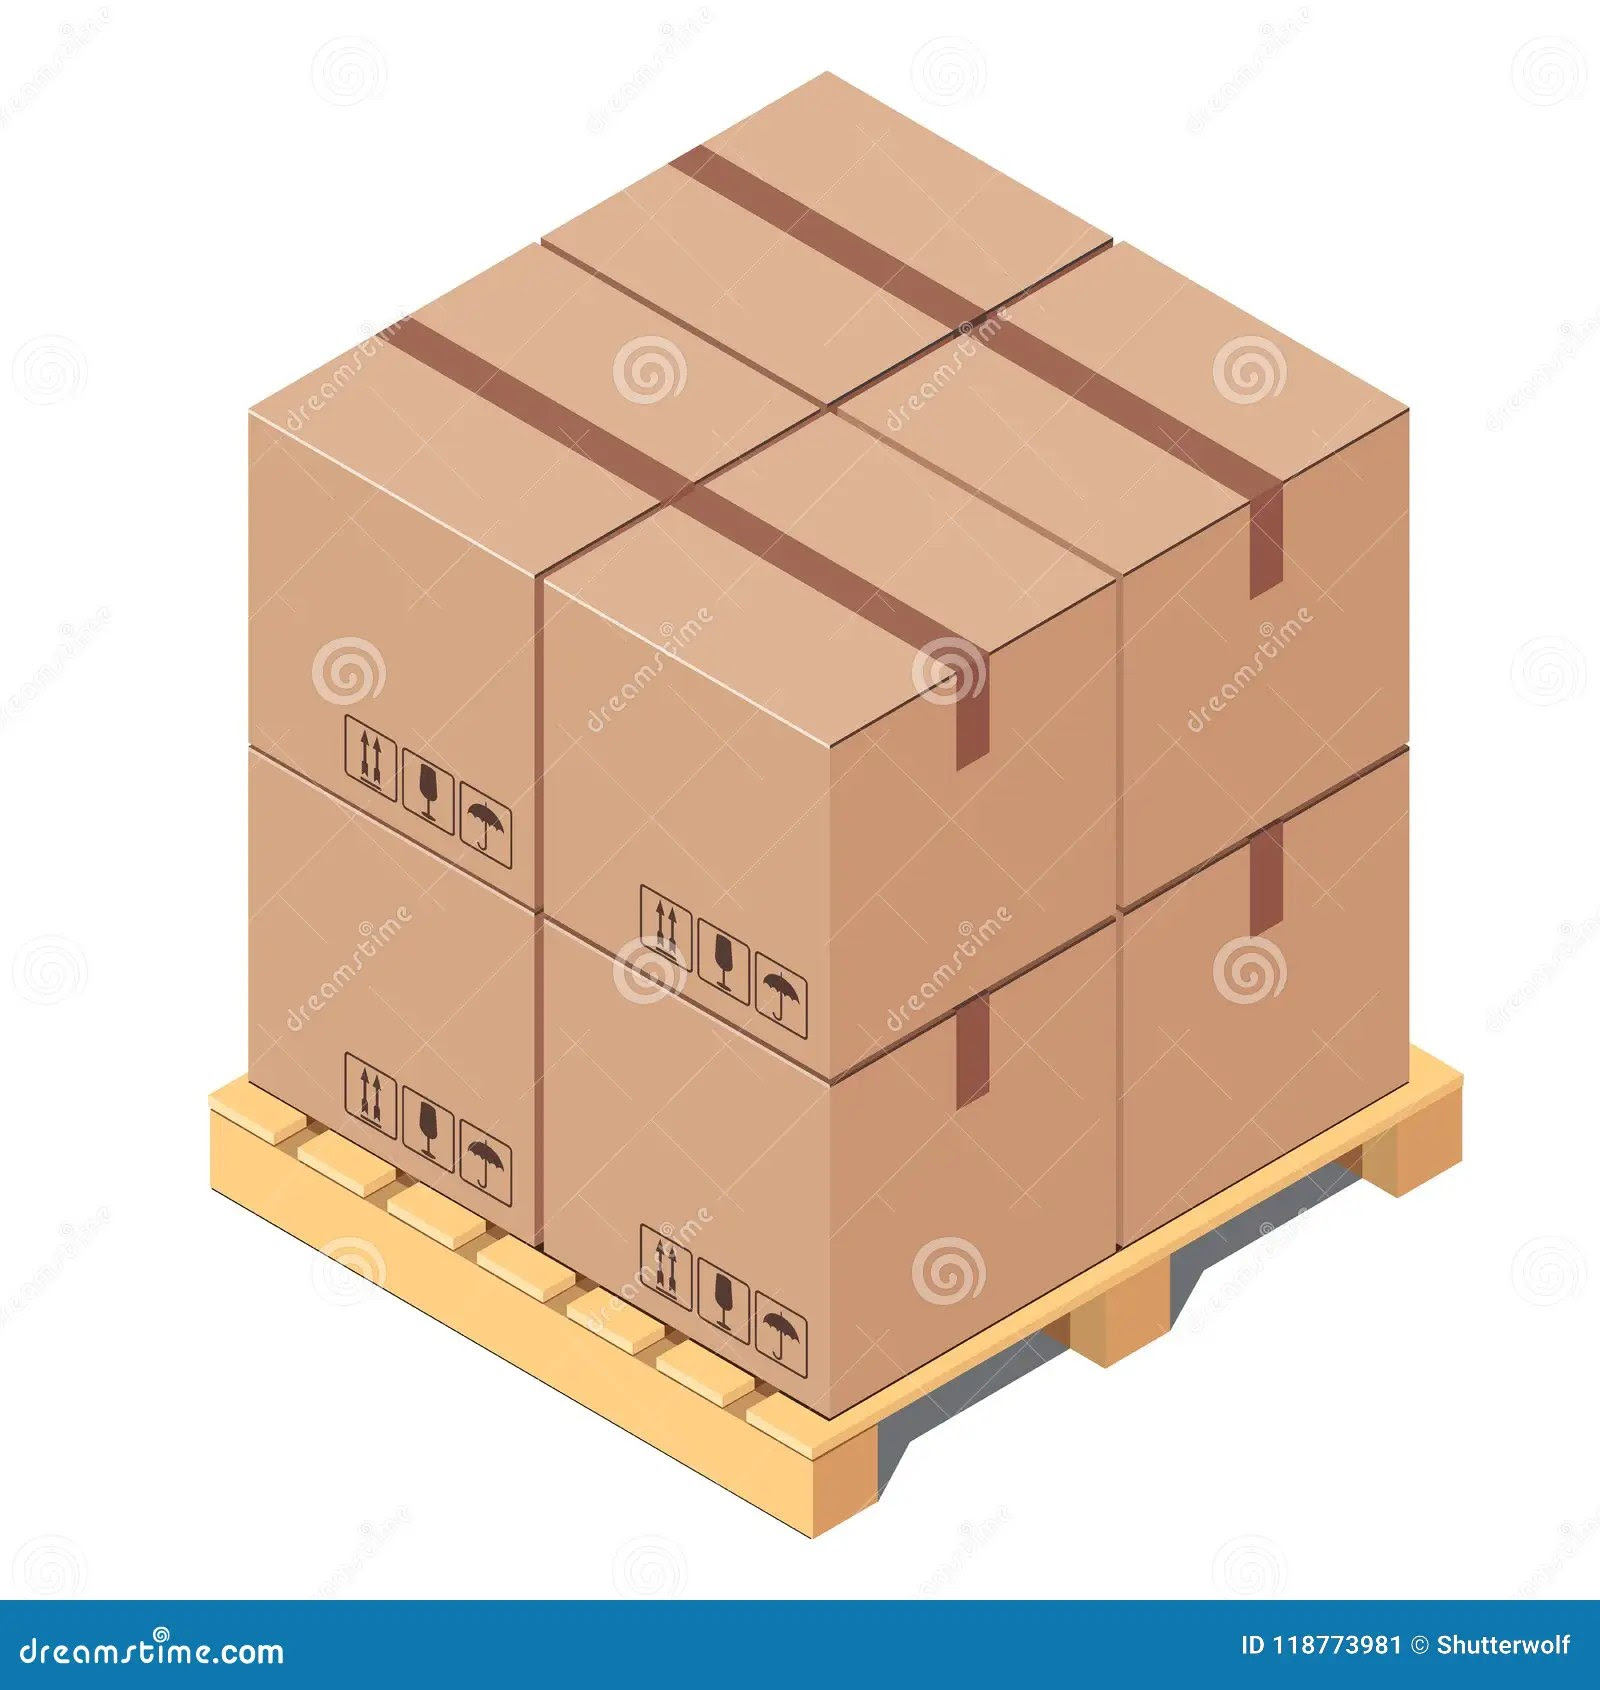 Download 313+ Wooden Pallet With Cardboard Boxes Mockup Yellowimages